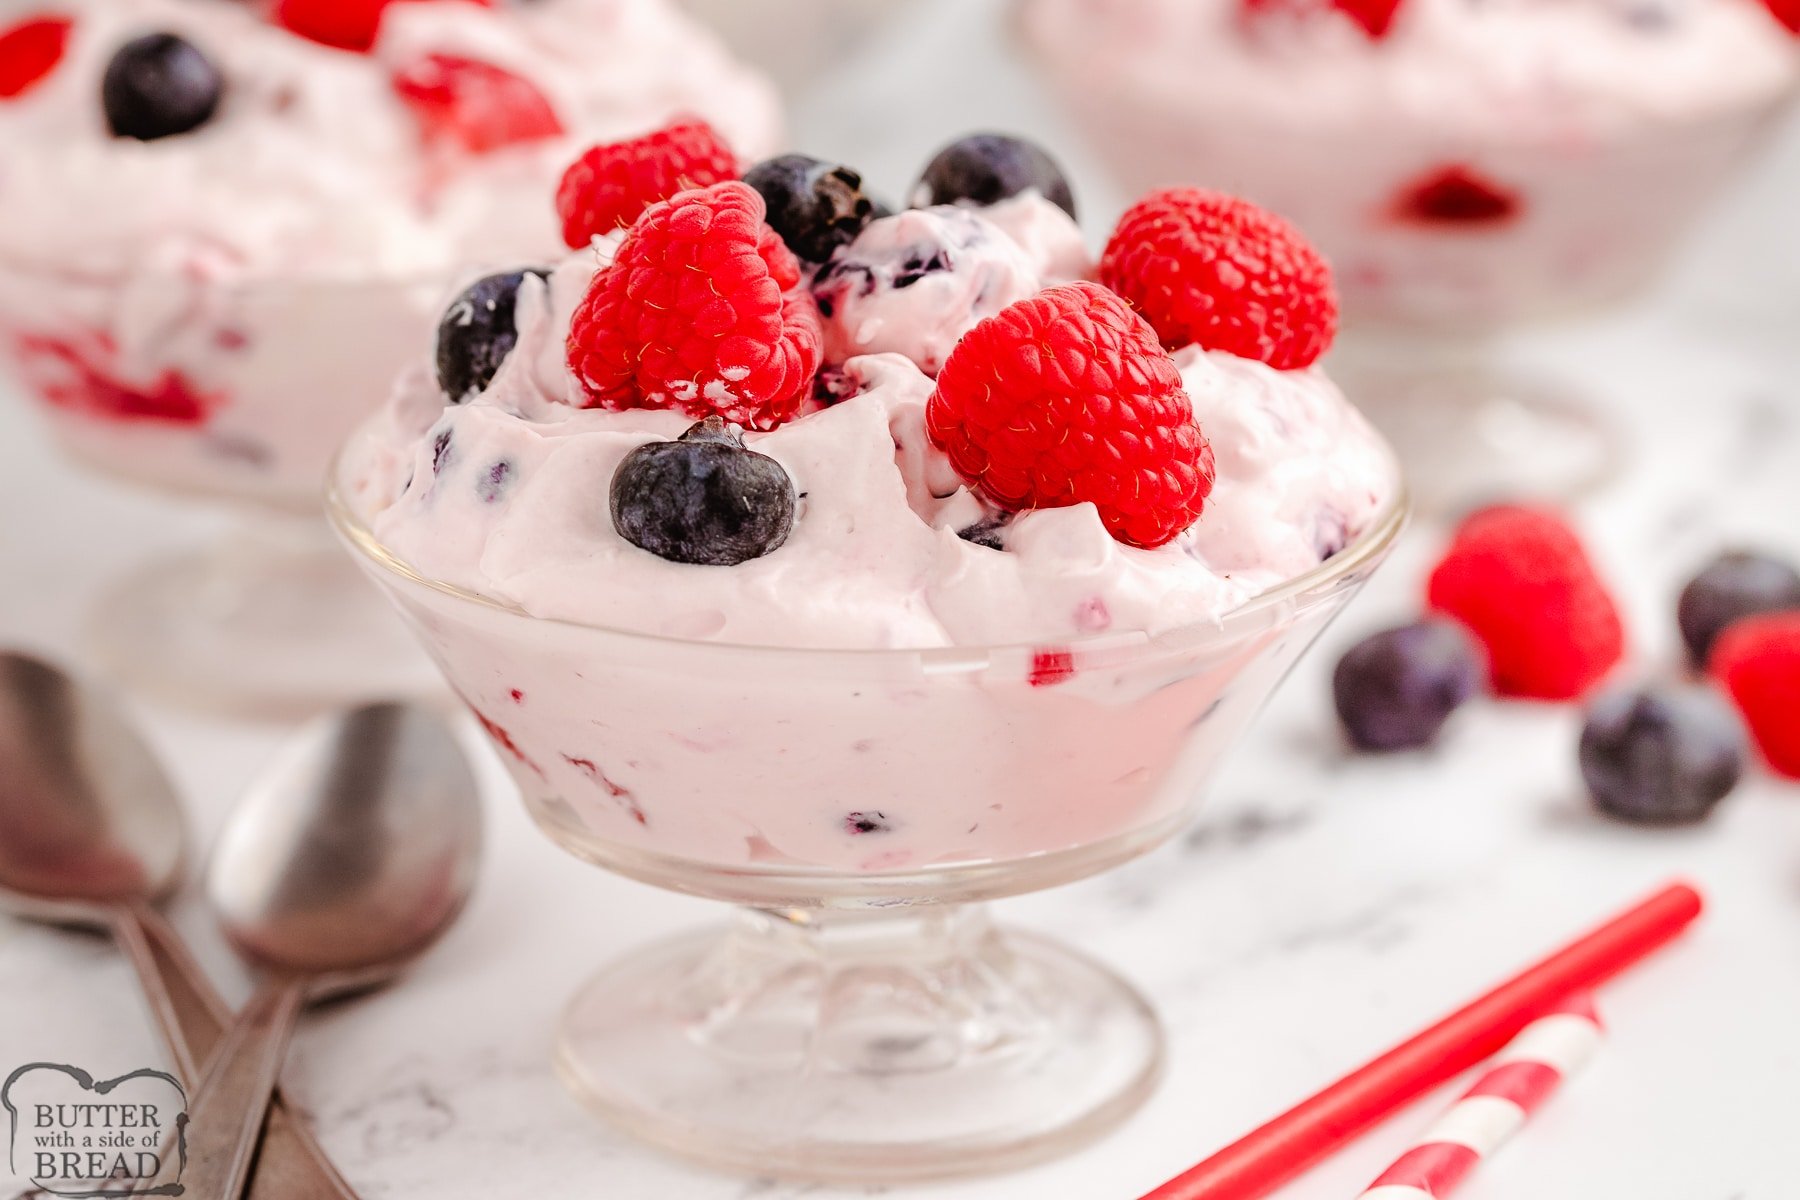 raspberries and blueberry salad with cream